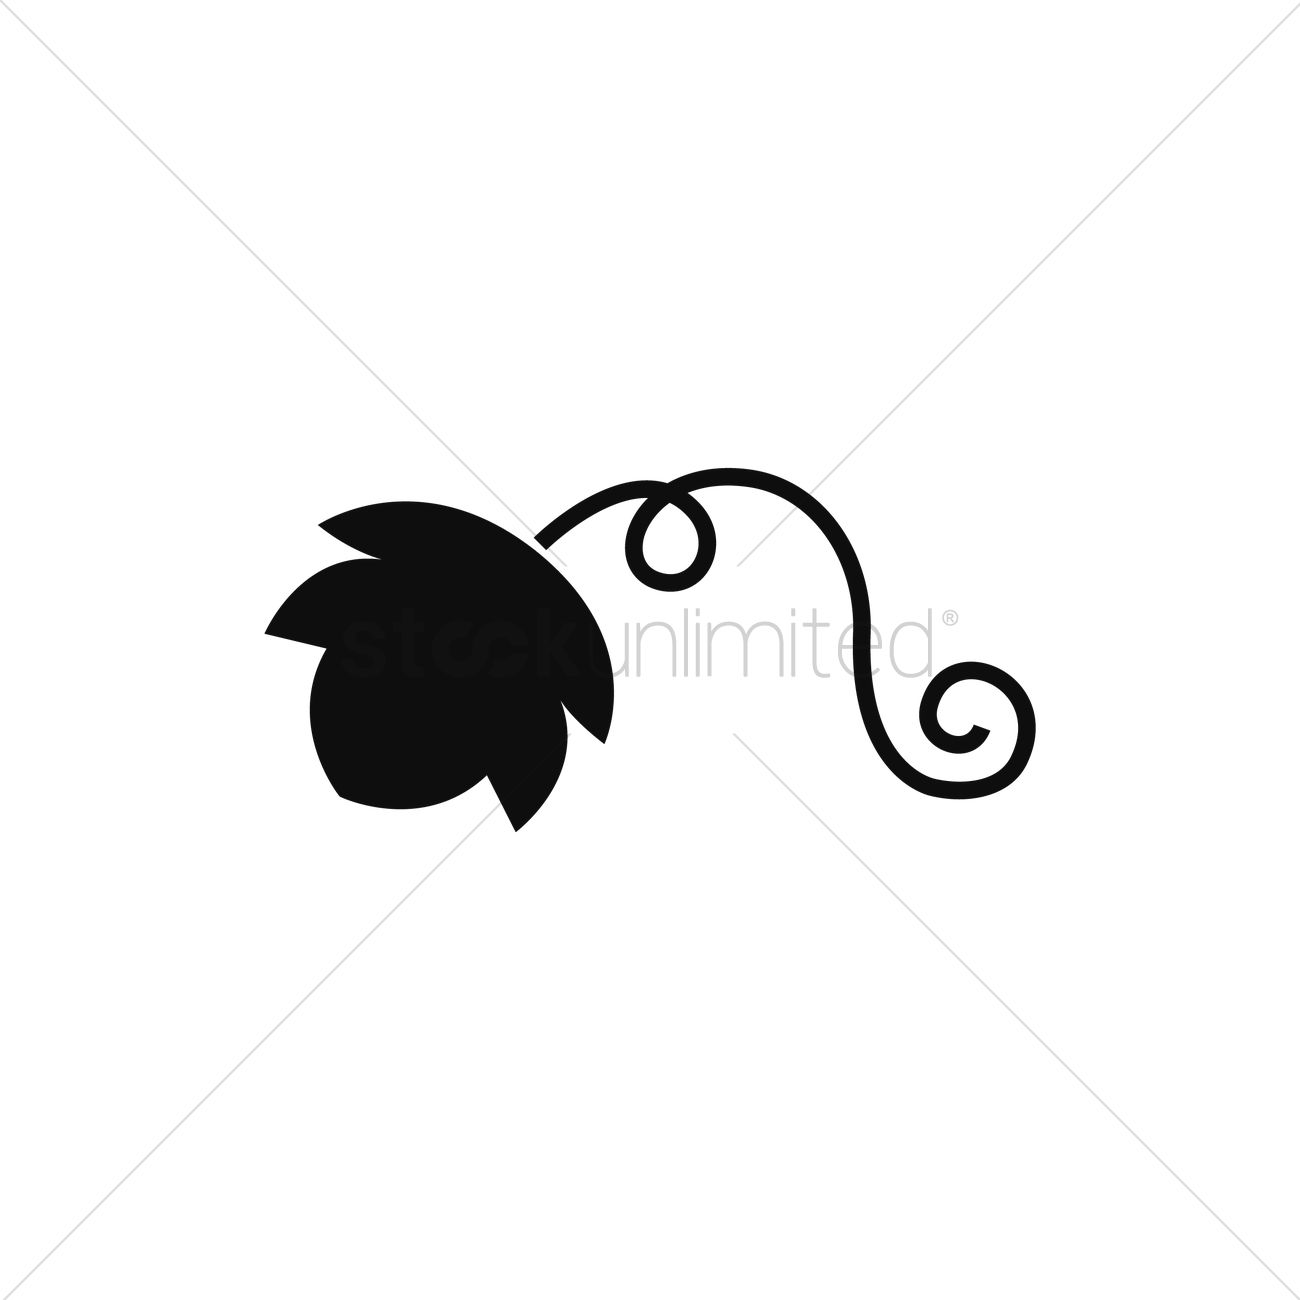 Vine Silhouette at GetDrawings.com | Free for personal use Vine